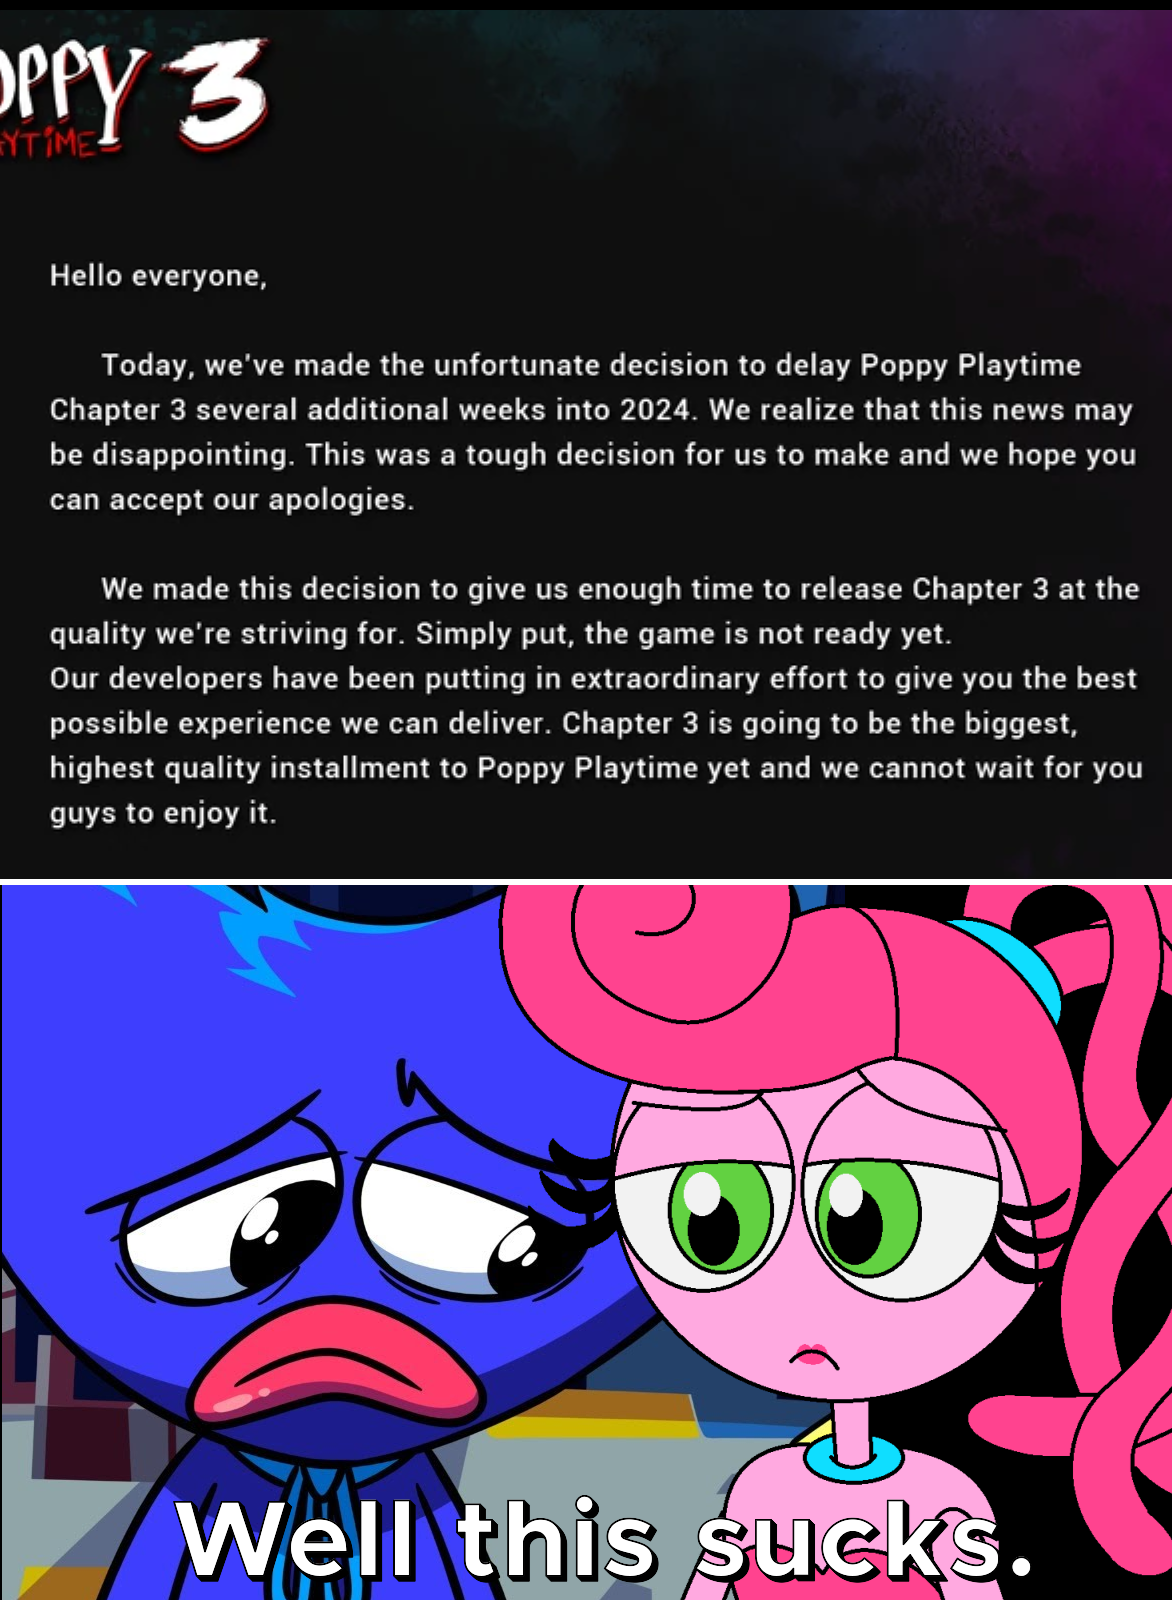 SmackNPie on X: Apologies for being late BUT: Poppy Playtime Chapter 2 got  a TON of new updates as you all know. Mommy Long Legs VHS, NEW Gameplay  screenshots etc Starting with